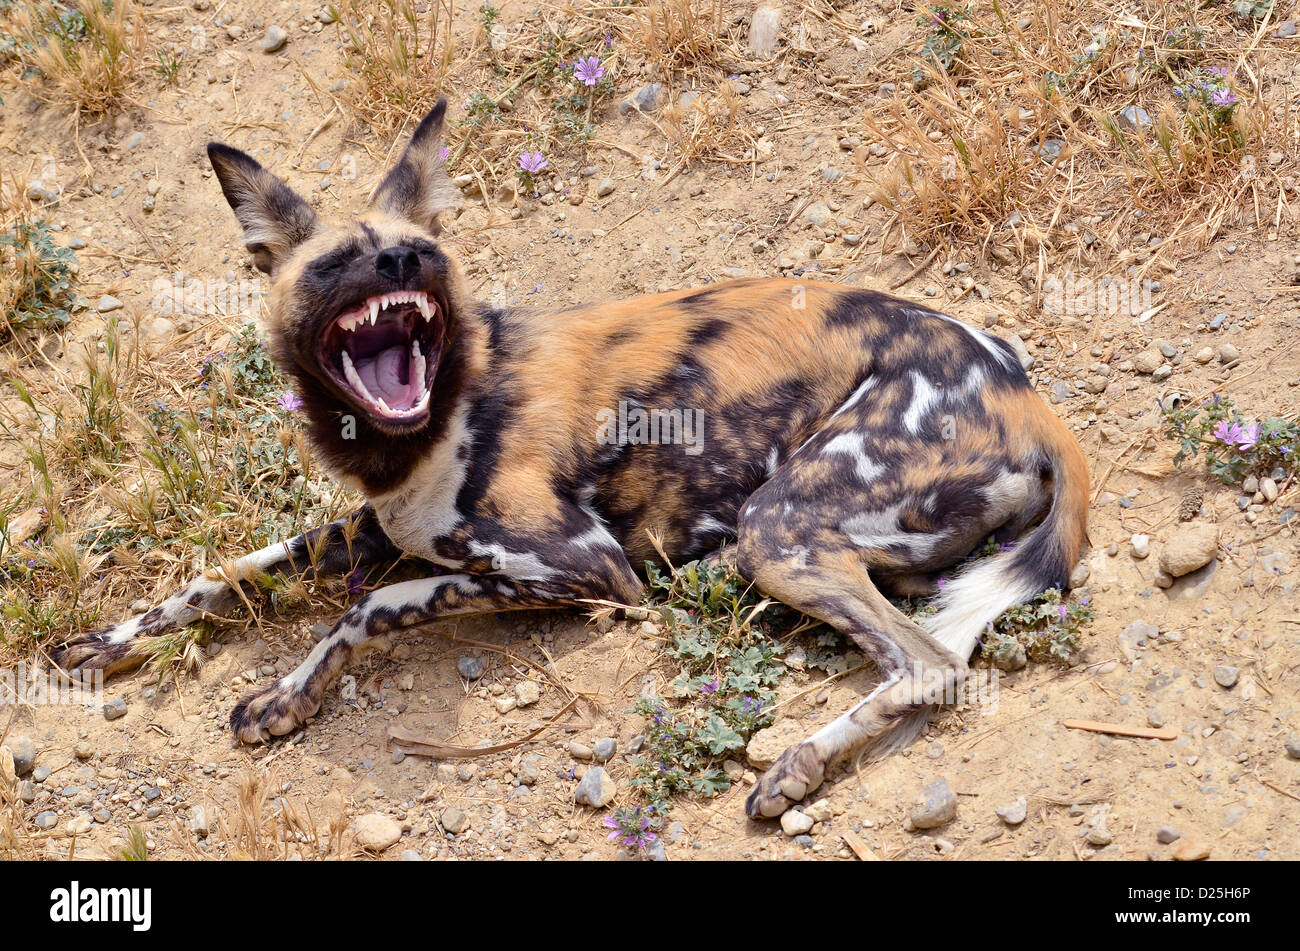 African Wild Dog (Lycaon pictus) lying on the ground showing its teeth Stock Photo